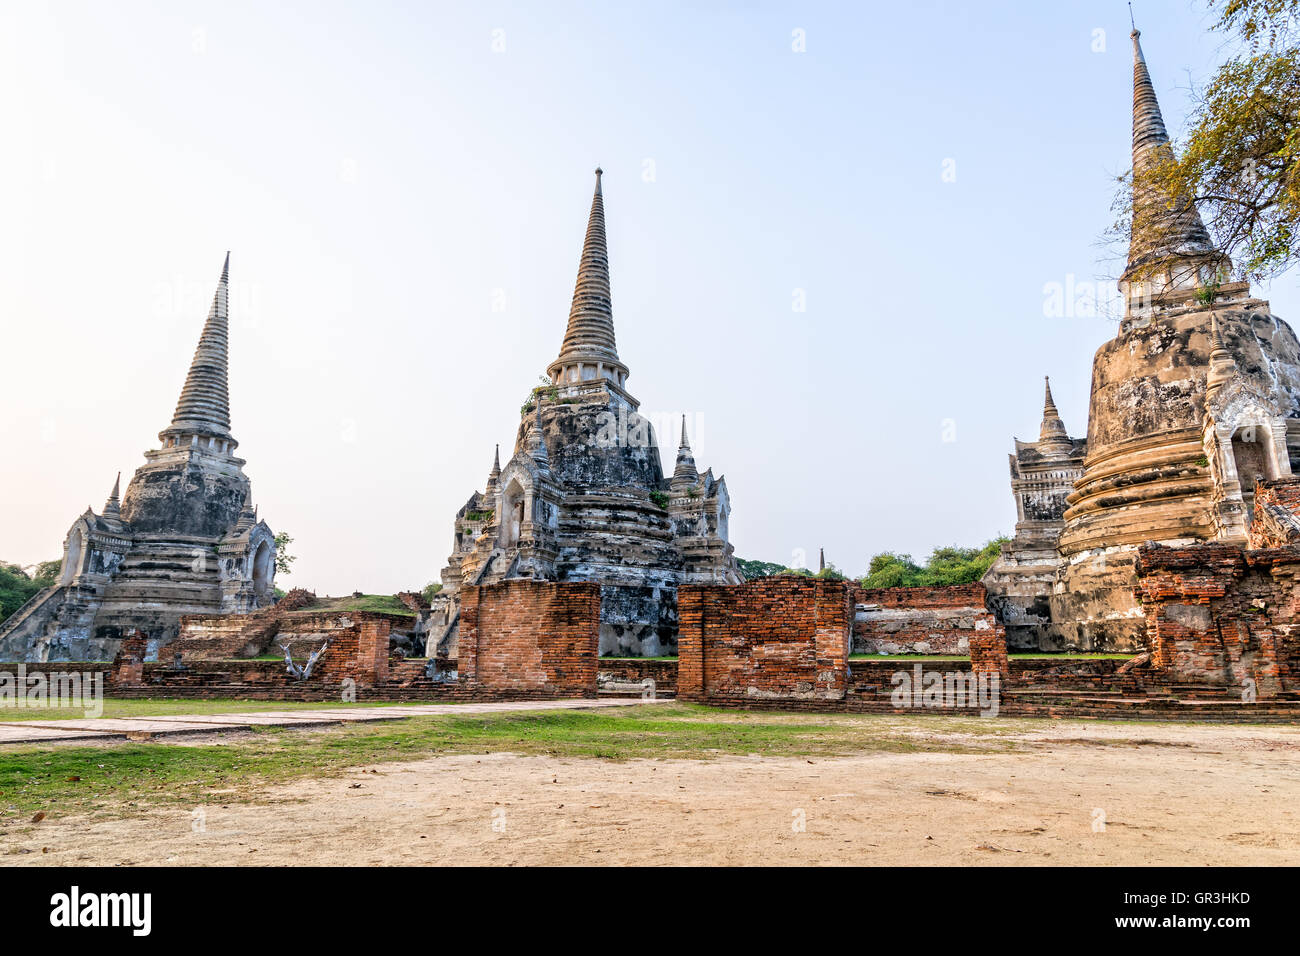 Ruins of ancient architecture three pagoda of Wat Phra Si Sanphet old temple famous attractions at Phra Nakhon Si Ayutthaya Stock Photo